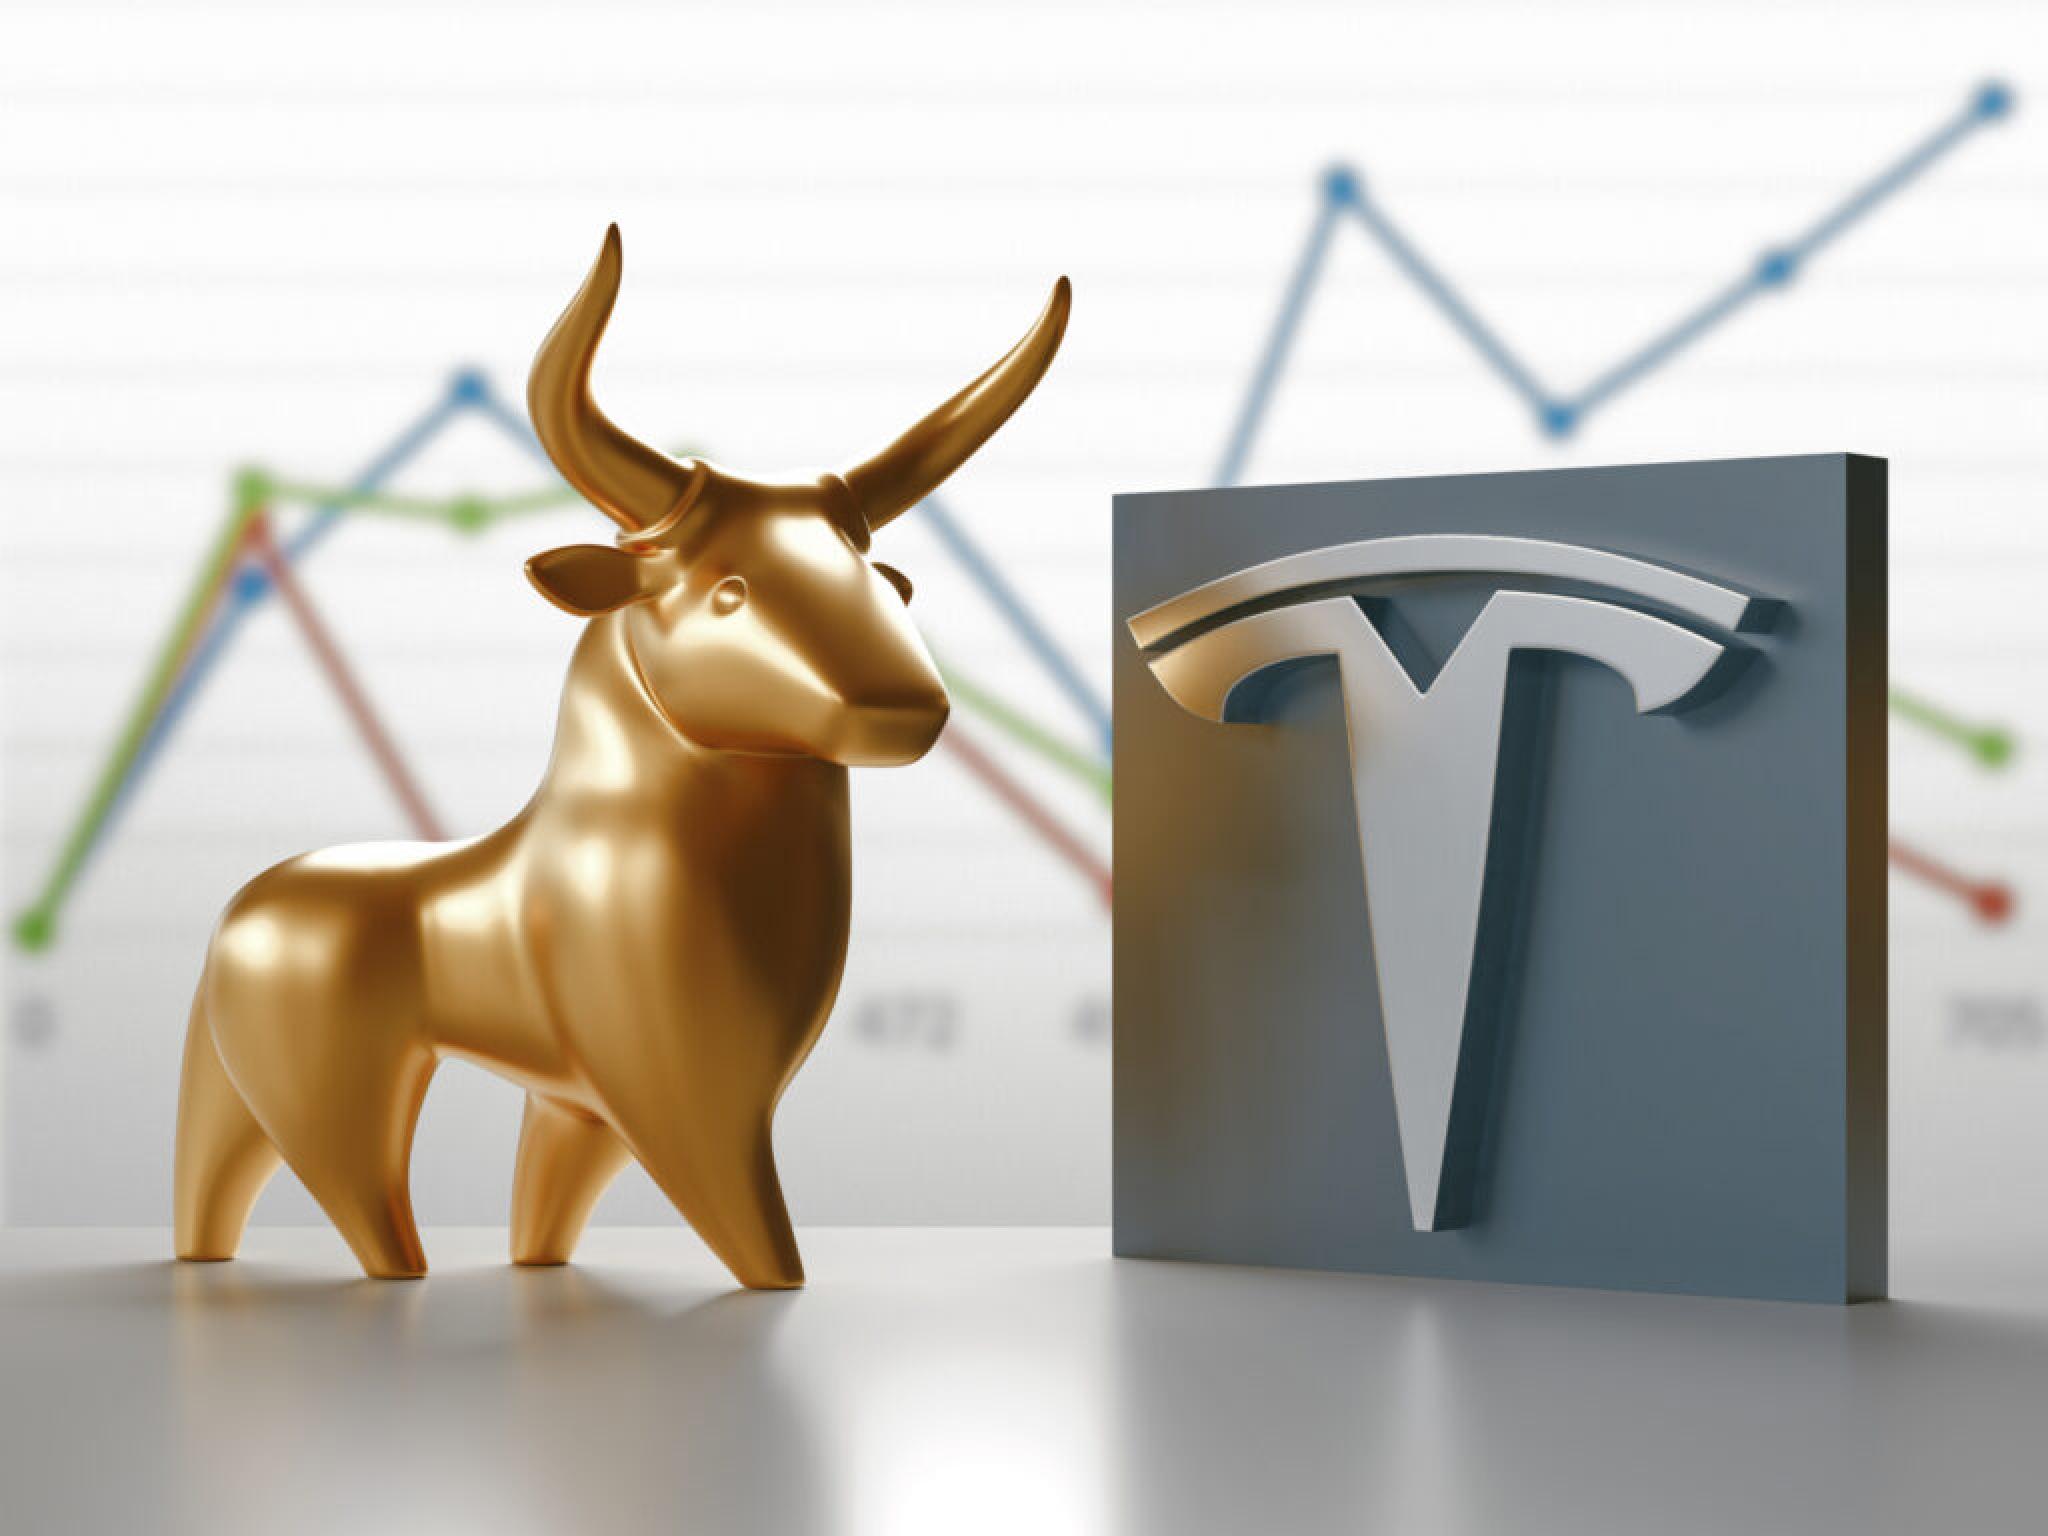  tesla-bull-gary-black-rues-attacks-from-fellow-bulls-says-opposing-management-strategy-is-not-attacking-elon 